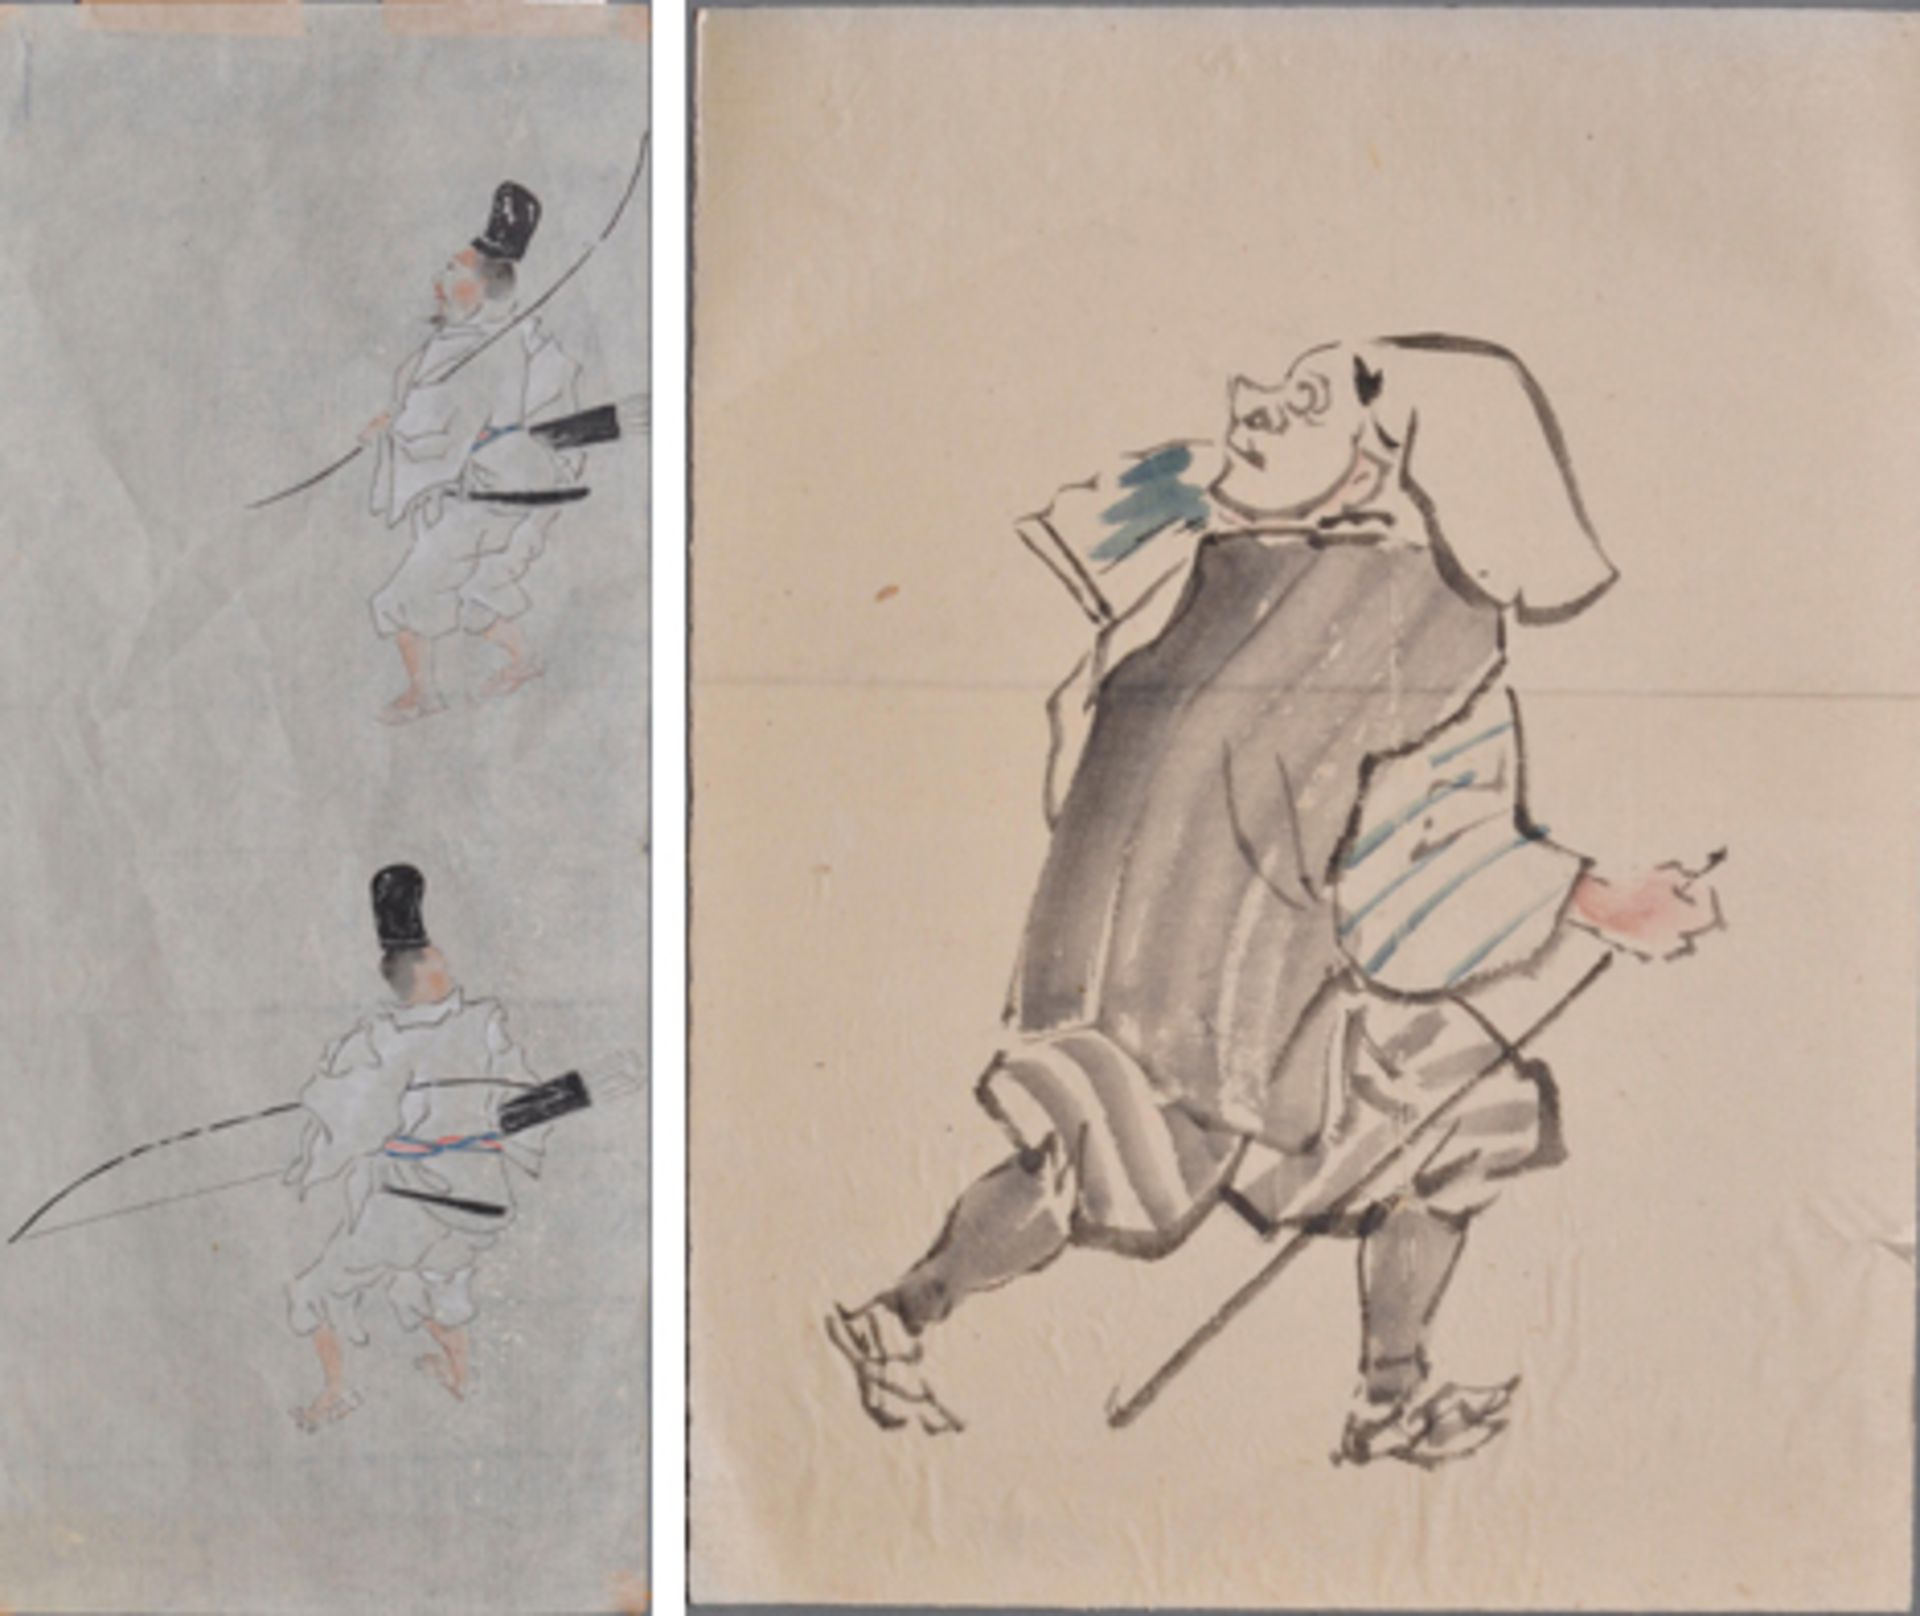 TWO SKETCHES FROM THE JAPANESE SCHOOL  Paper with ink and watercolor. Japan, 19th cent.    SIZES